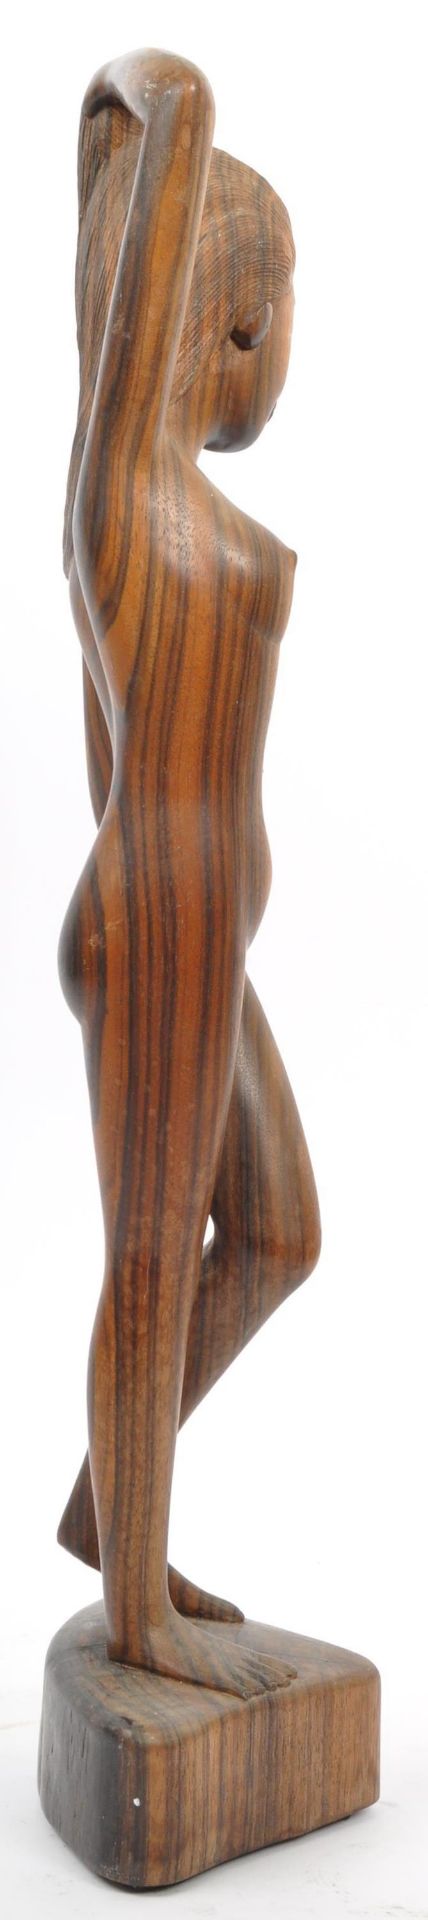 20TH CENTURY ASIAN CARVED FRUITWOOD NUDE STUDY FIGURE - Image 4 of 5